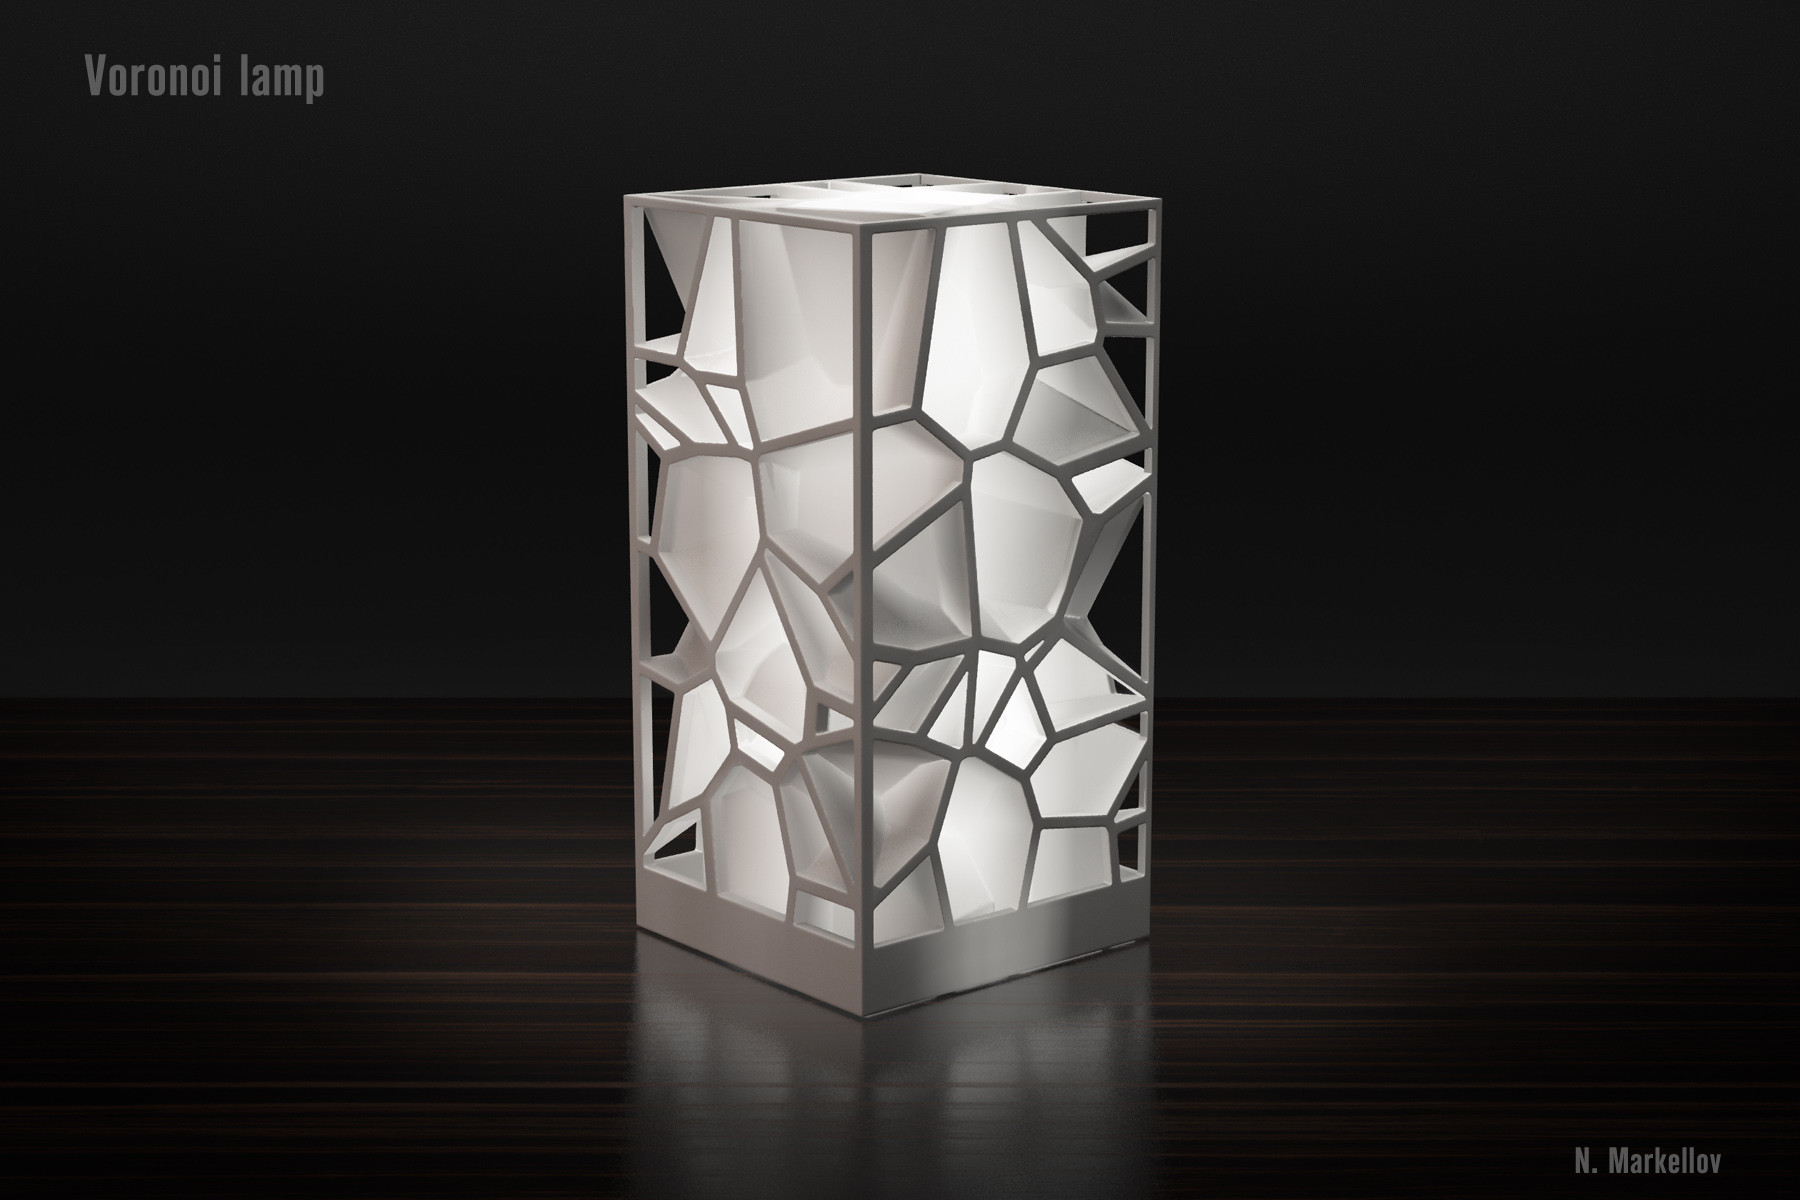 16 Fabulous Cheap 9 Inch Cylinder Vase 2024 free download cheap 9 inch cylinder vase of voronoi lamp by markellov thingiverse intended for by markellov dec 9 2014 view original